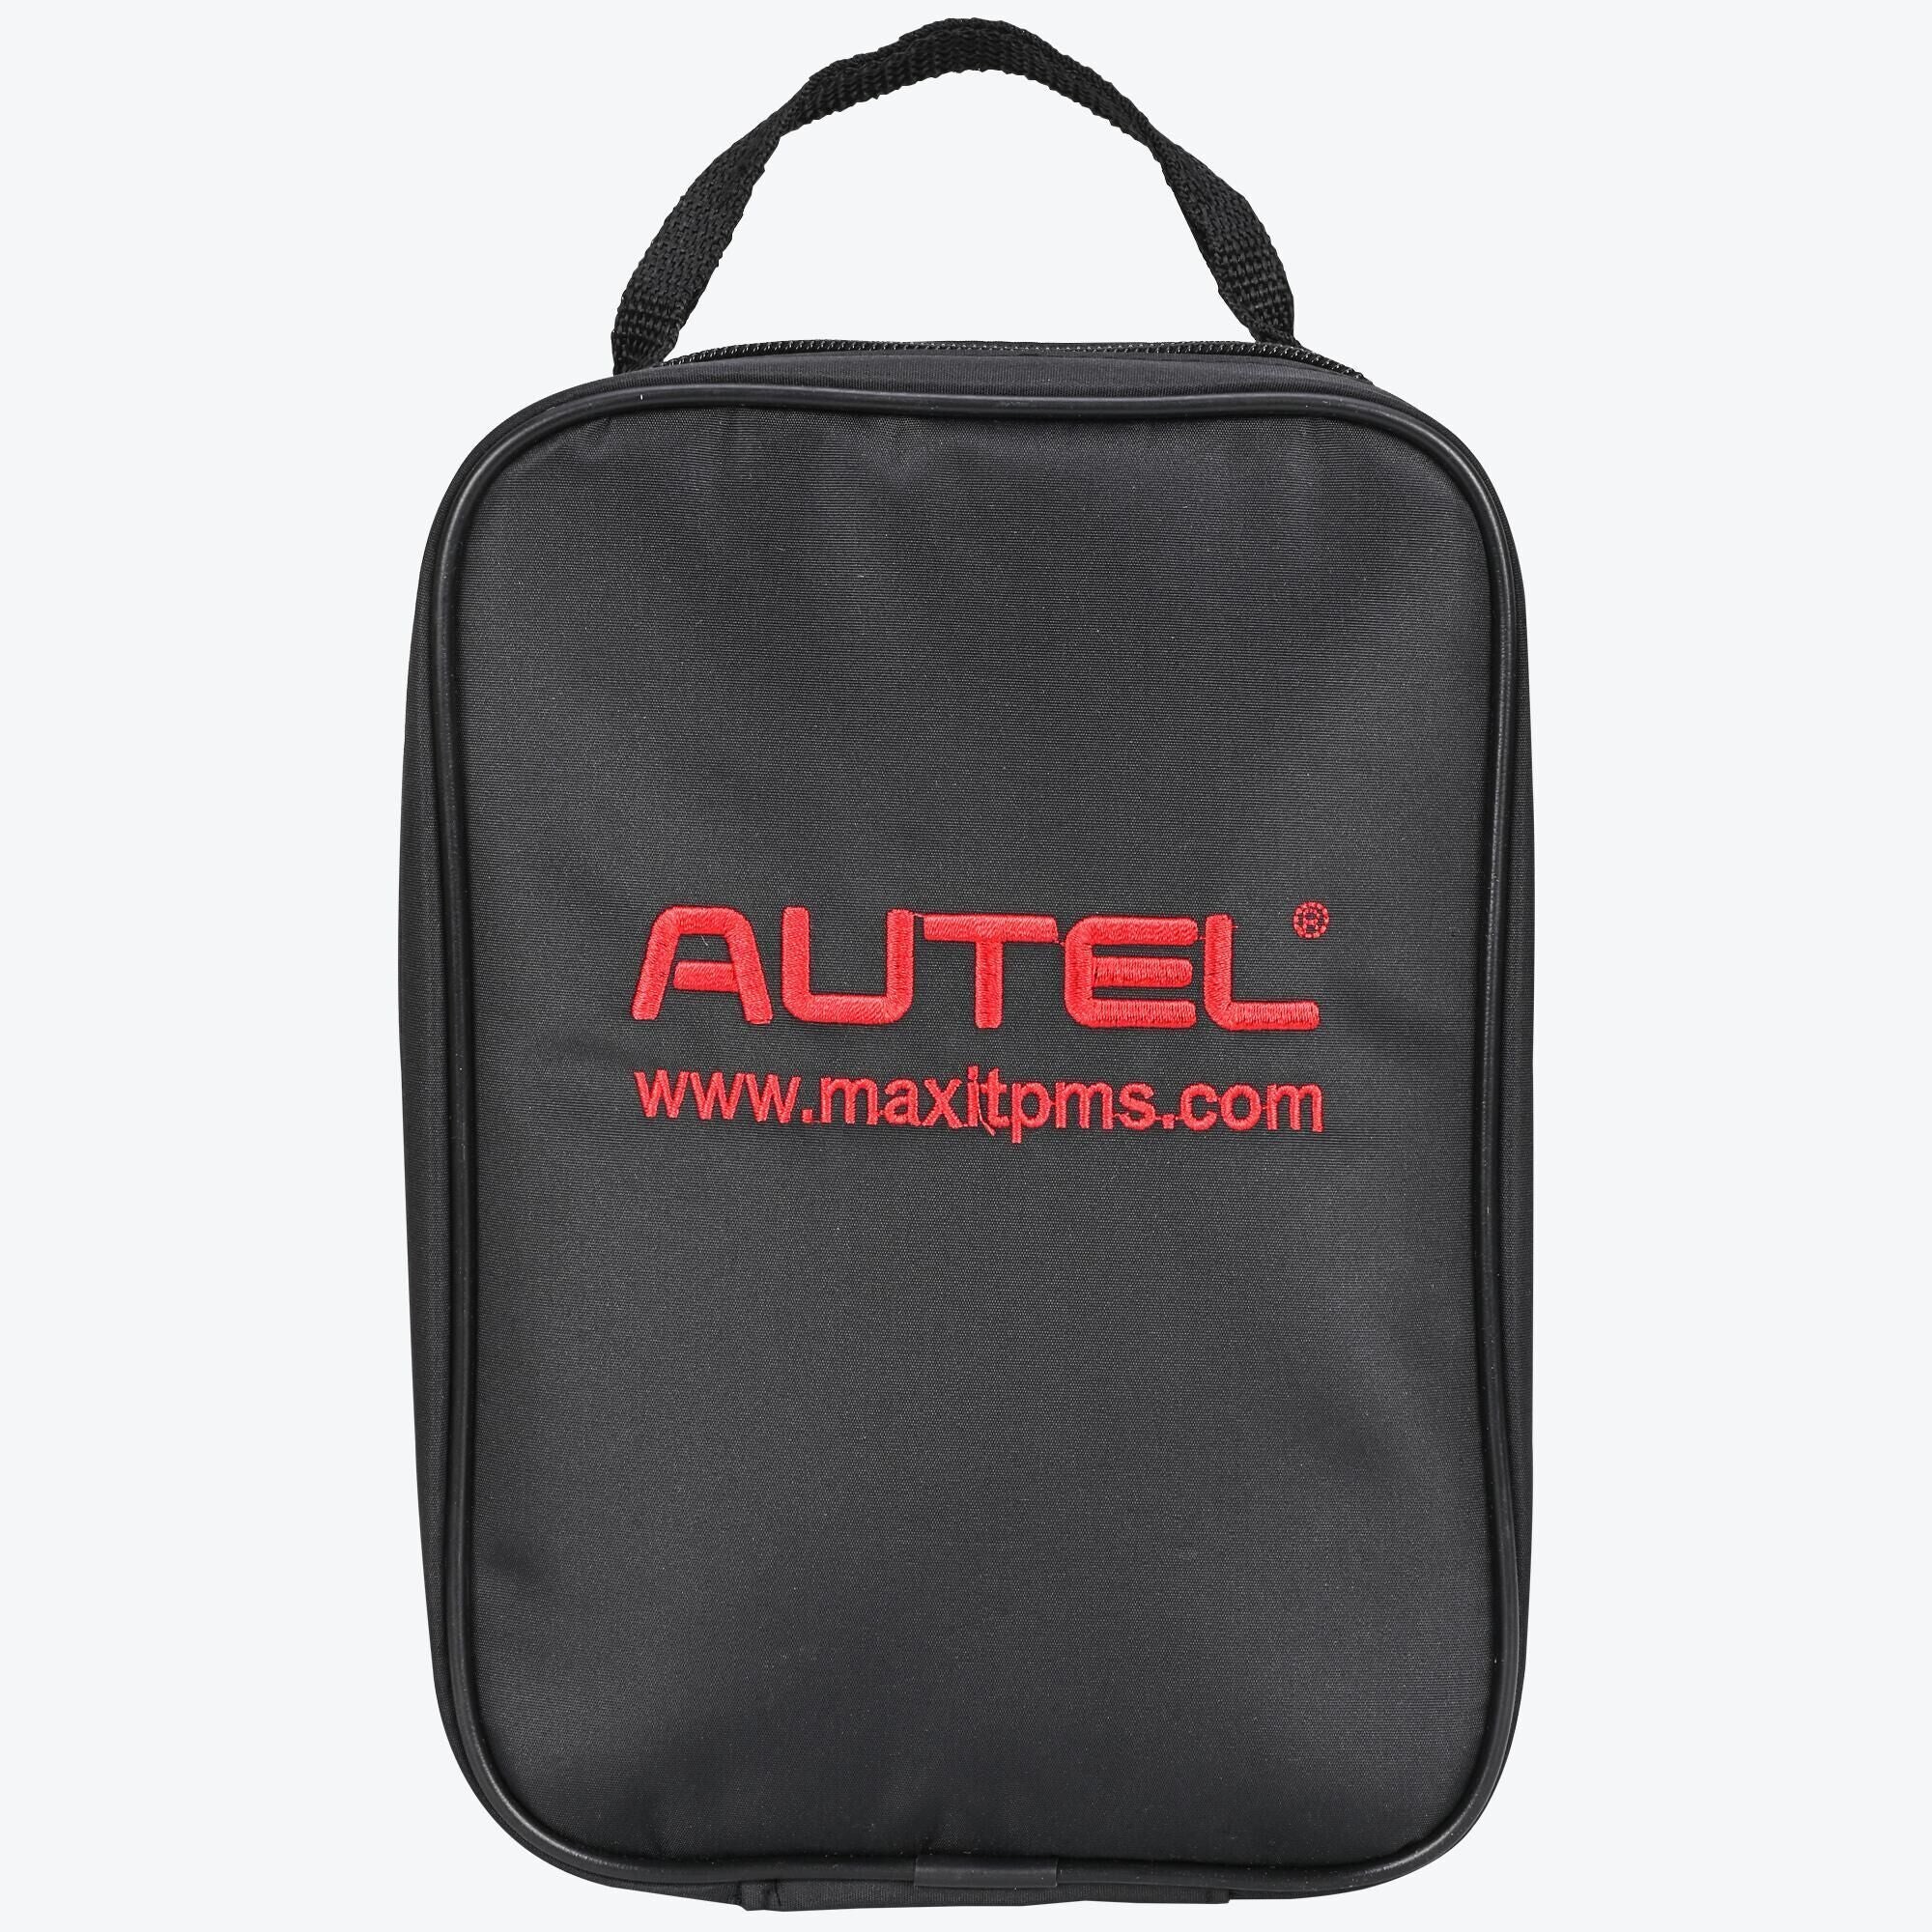 Autel MaxiTPMS TS508 TPMS Diagnostic and Relearn Tool TPMS Programming Tool for MX-Sensors (315/433 MHz) TPMS Relearn Activate All Sensors Ship from US Local Distributor